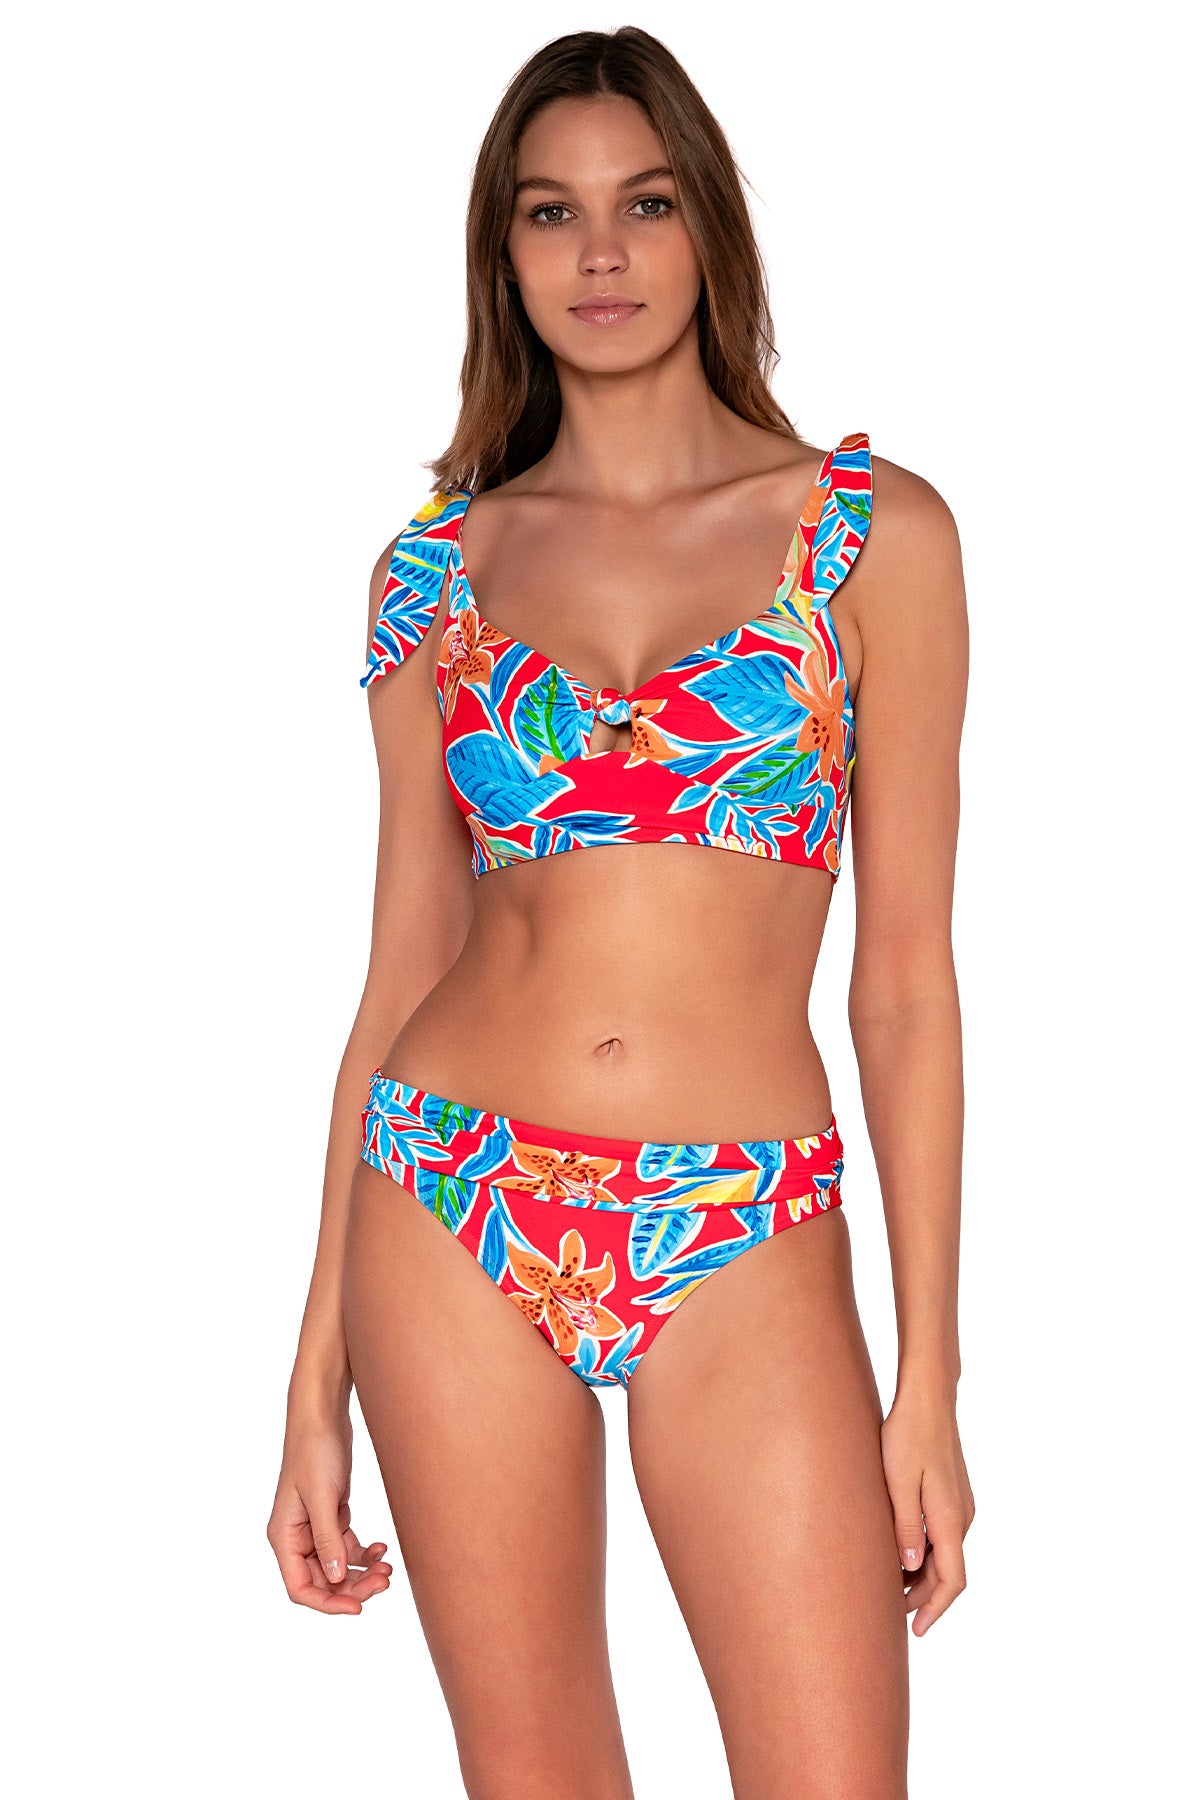 Front view of Sunsets Tiger Lily Lily Top with matching Unforgettable Bottom bikini